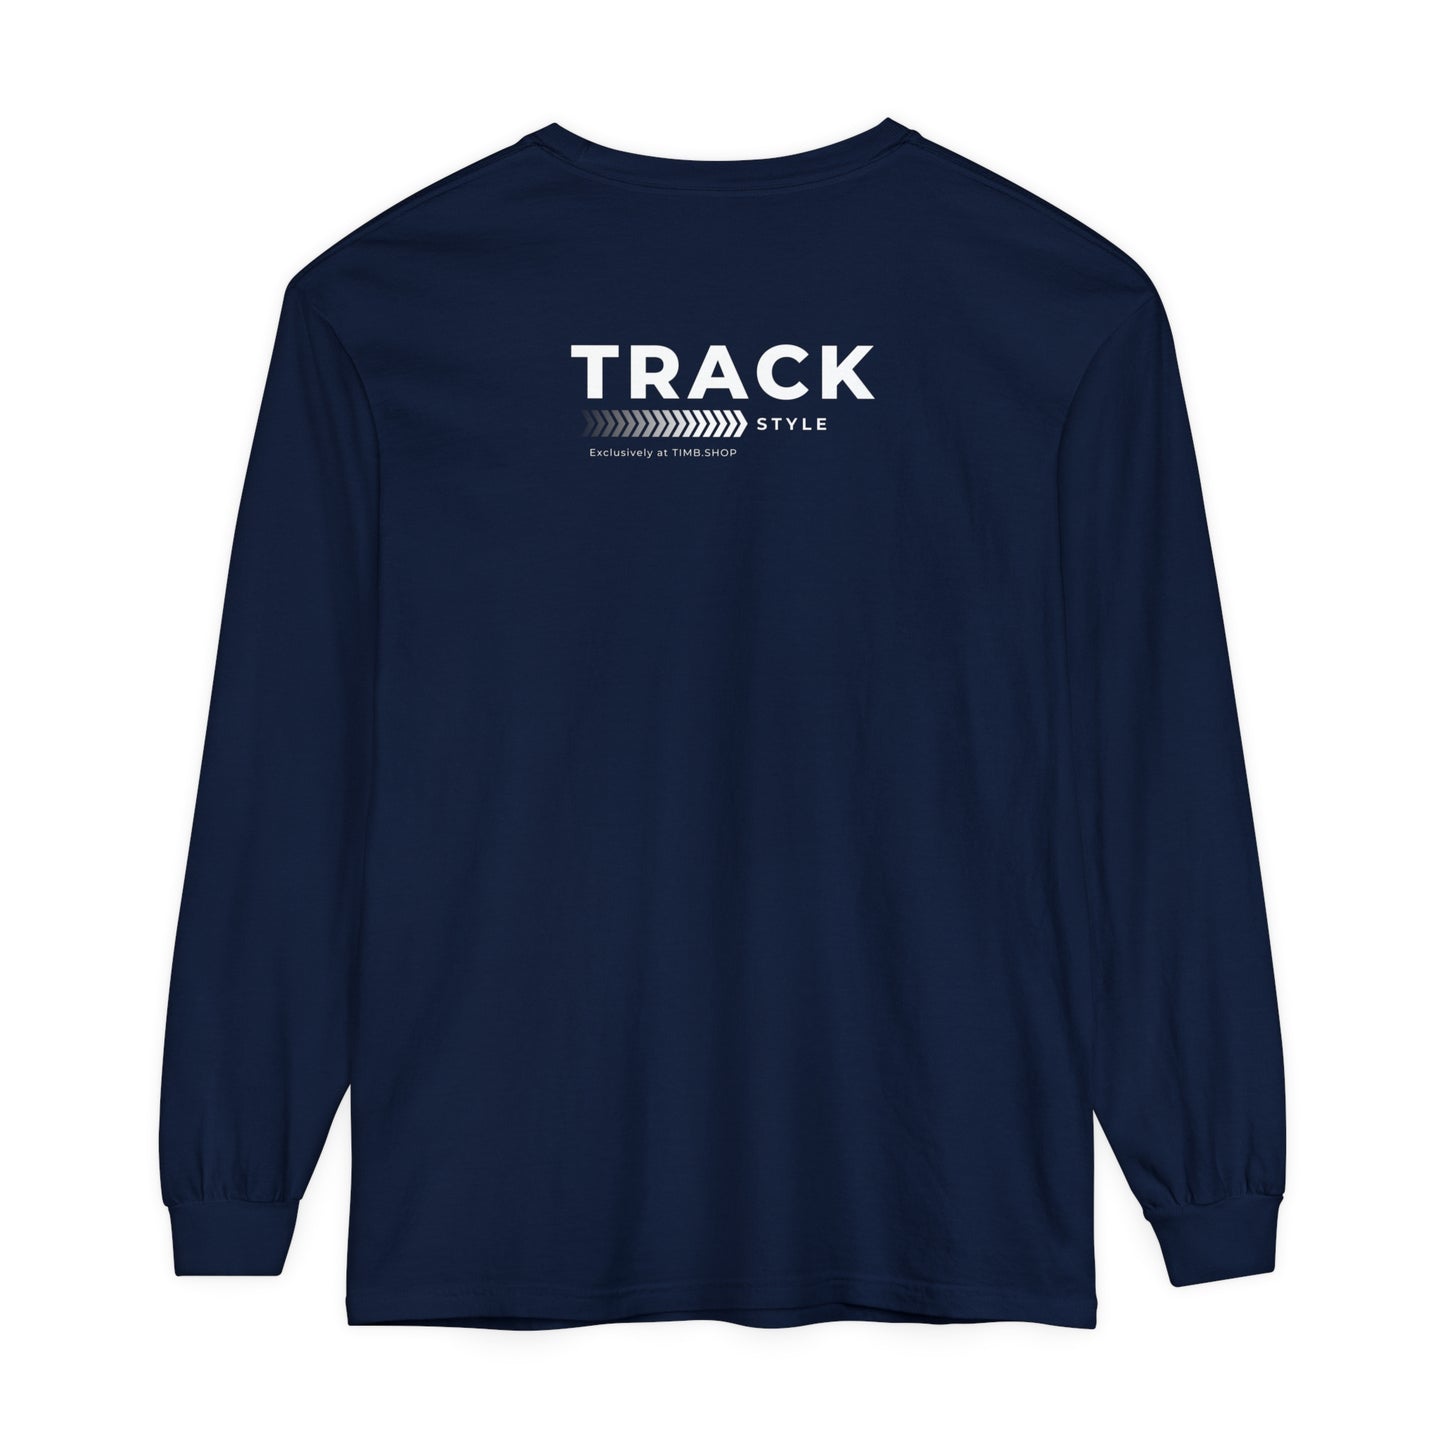 This is my track shirt